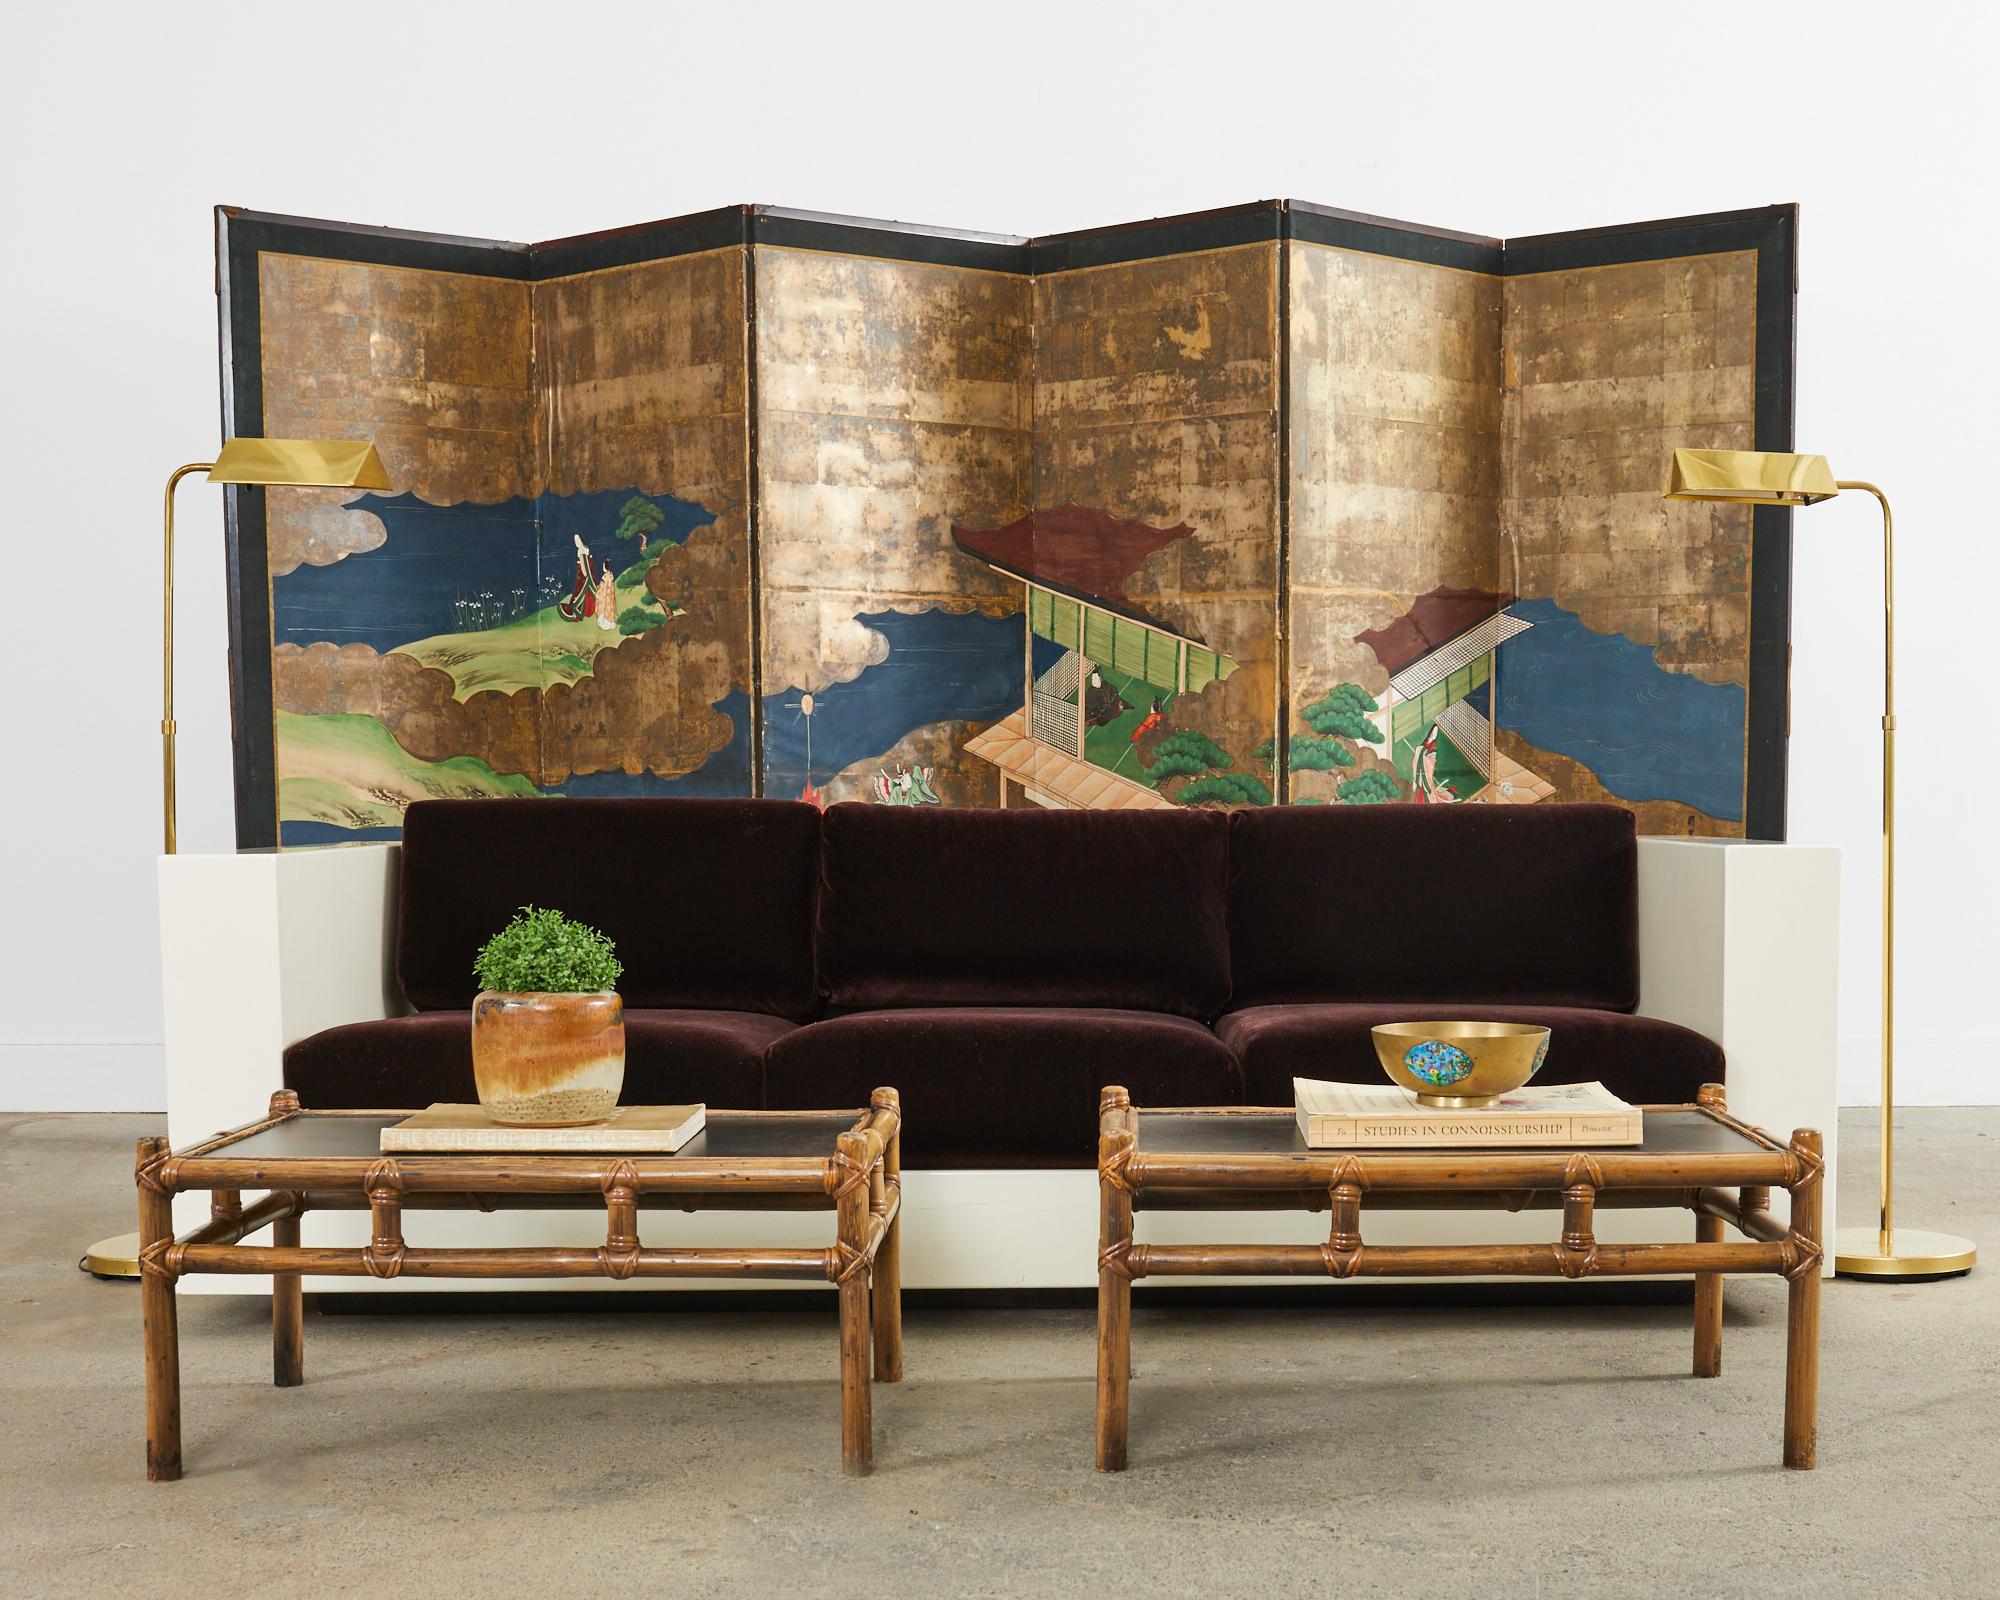 Large early 20th century Japanese late Meiji period six-panel folding byobu screen depicting episodes from the tale of Genji. The scenes include butterfly dancers and third princess with her cat. Beautifully crafted with gold leaf squares and